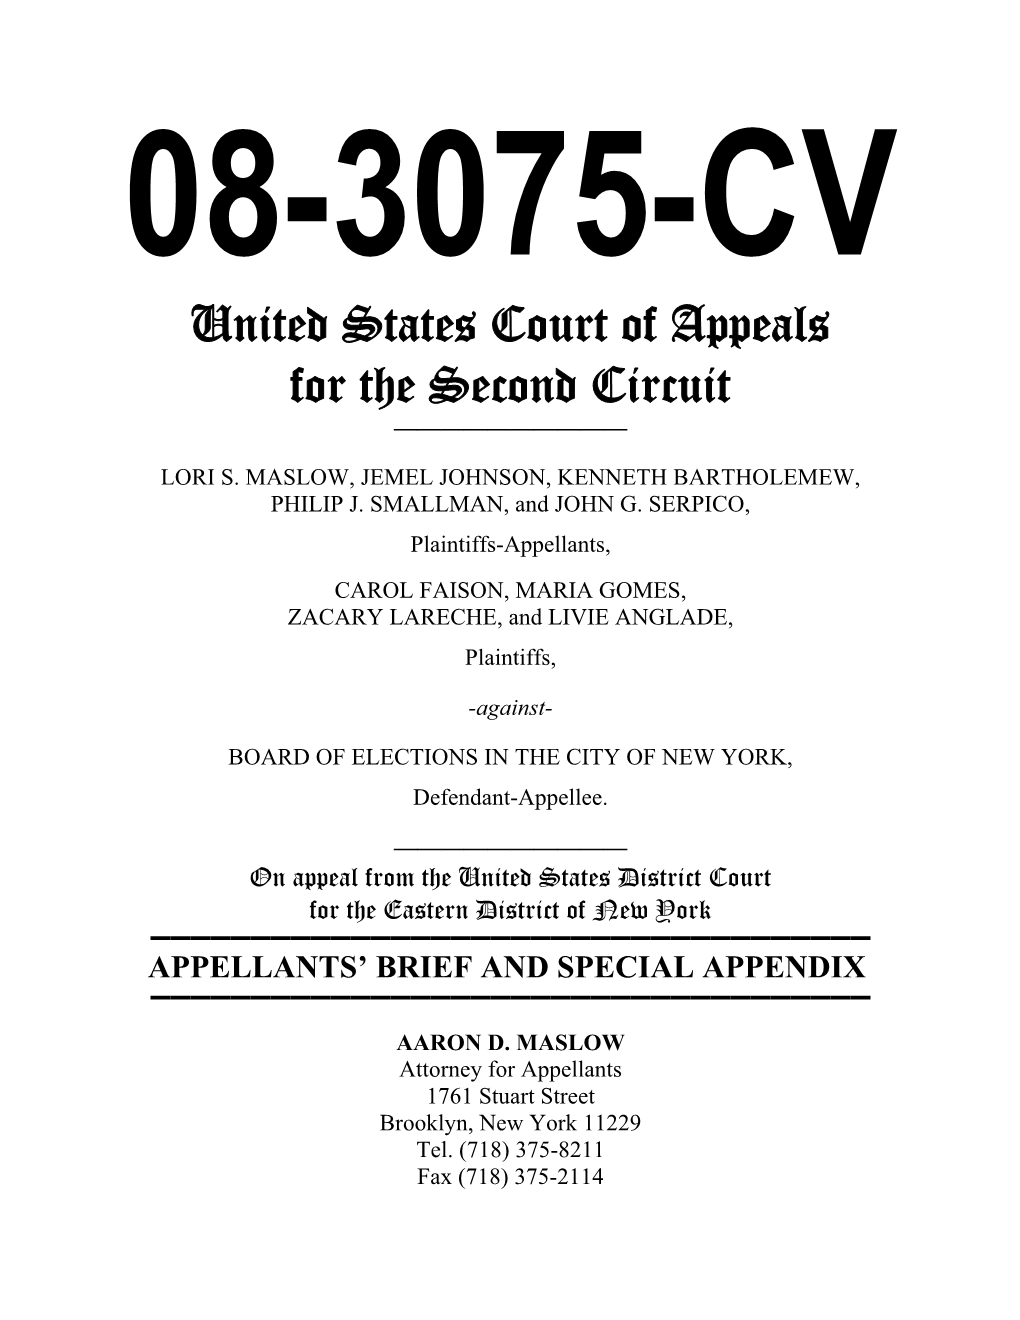 United States Court of Appeals for the Second Circuit ——————————